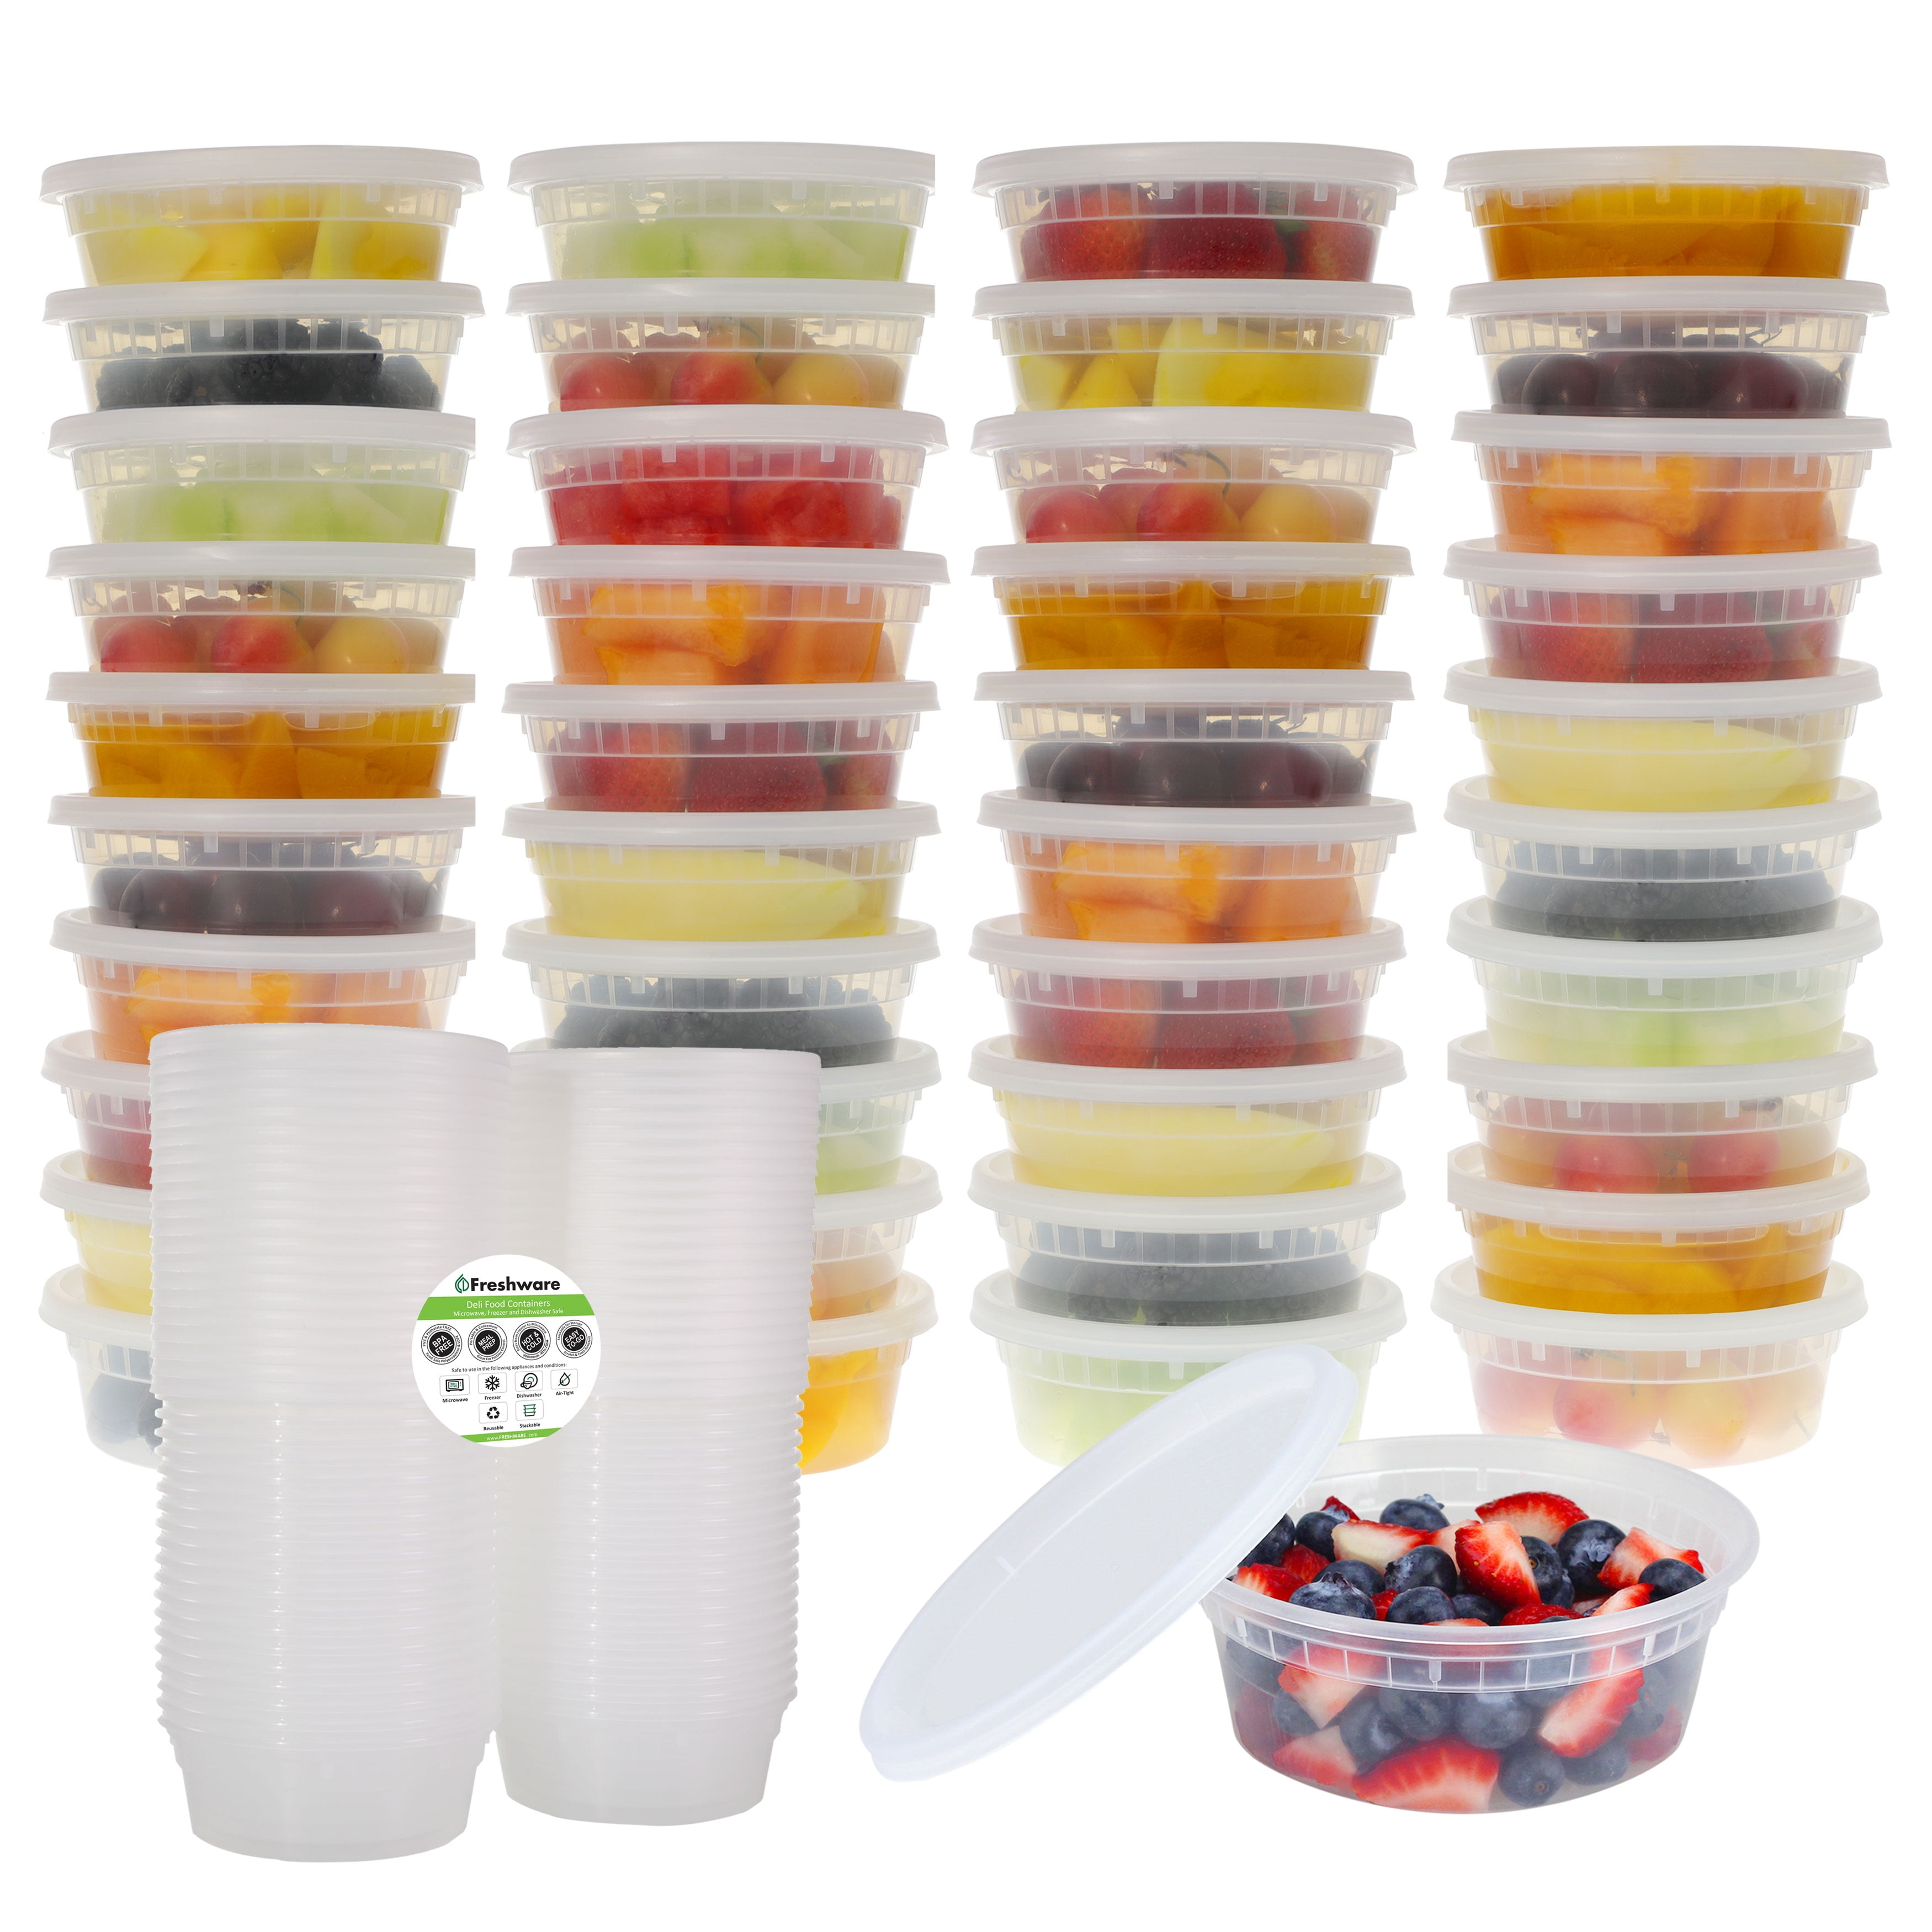 Food Storage Containers, 3 Pack(760ml, 1150ml, 1500ml) Plastic Containers  with Lids, Deli, Slime, Soup, Meal Prep Containers | BPA Free | Leakproof 